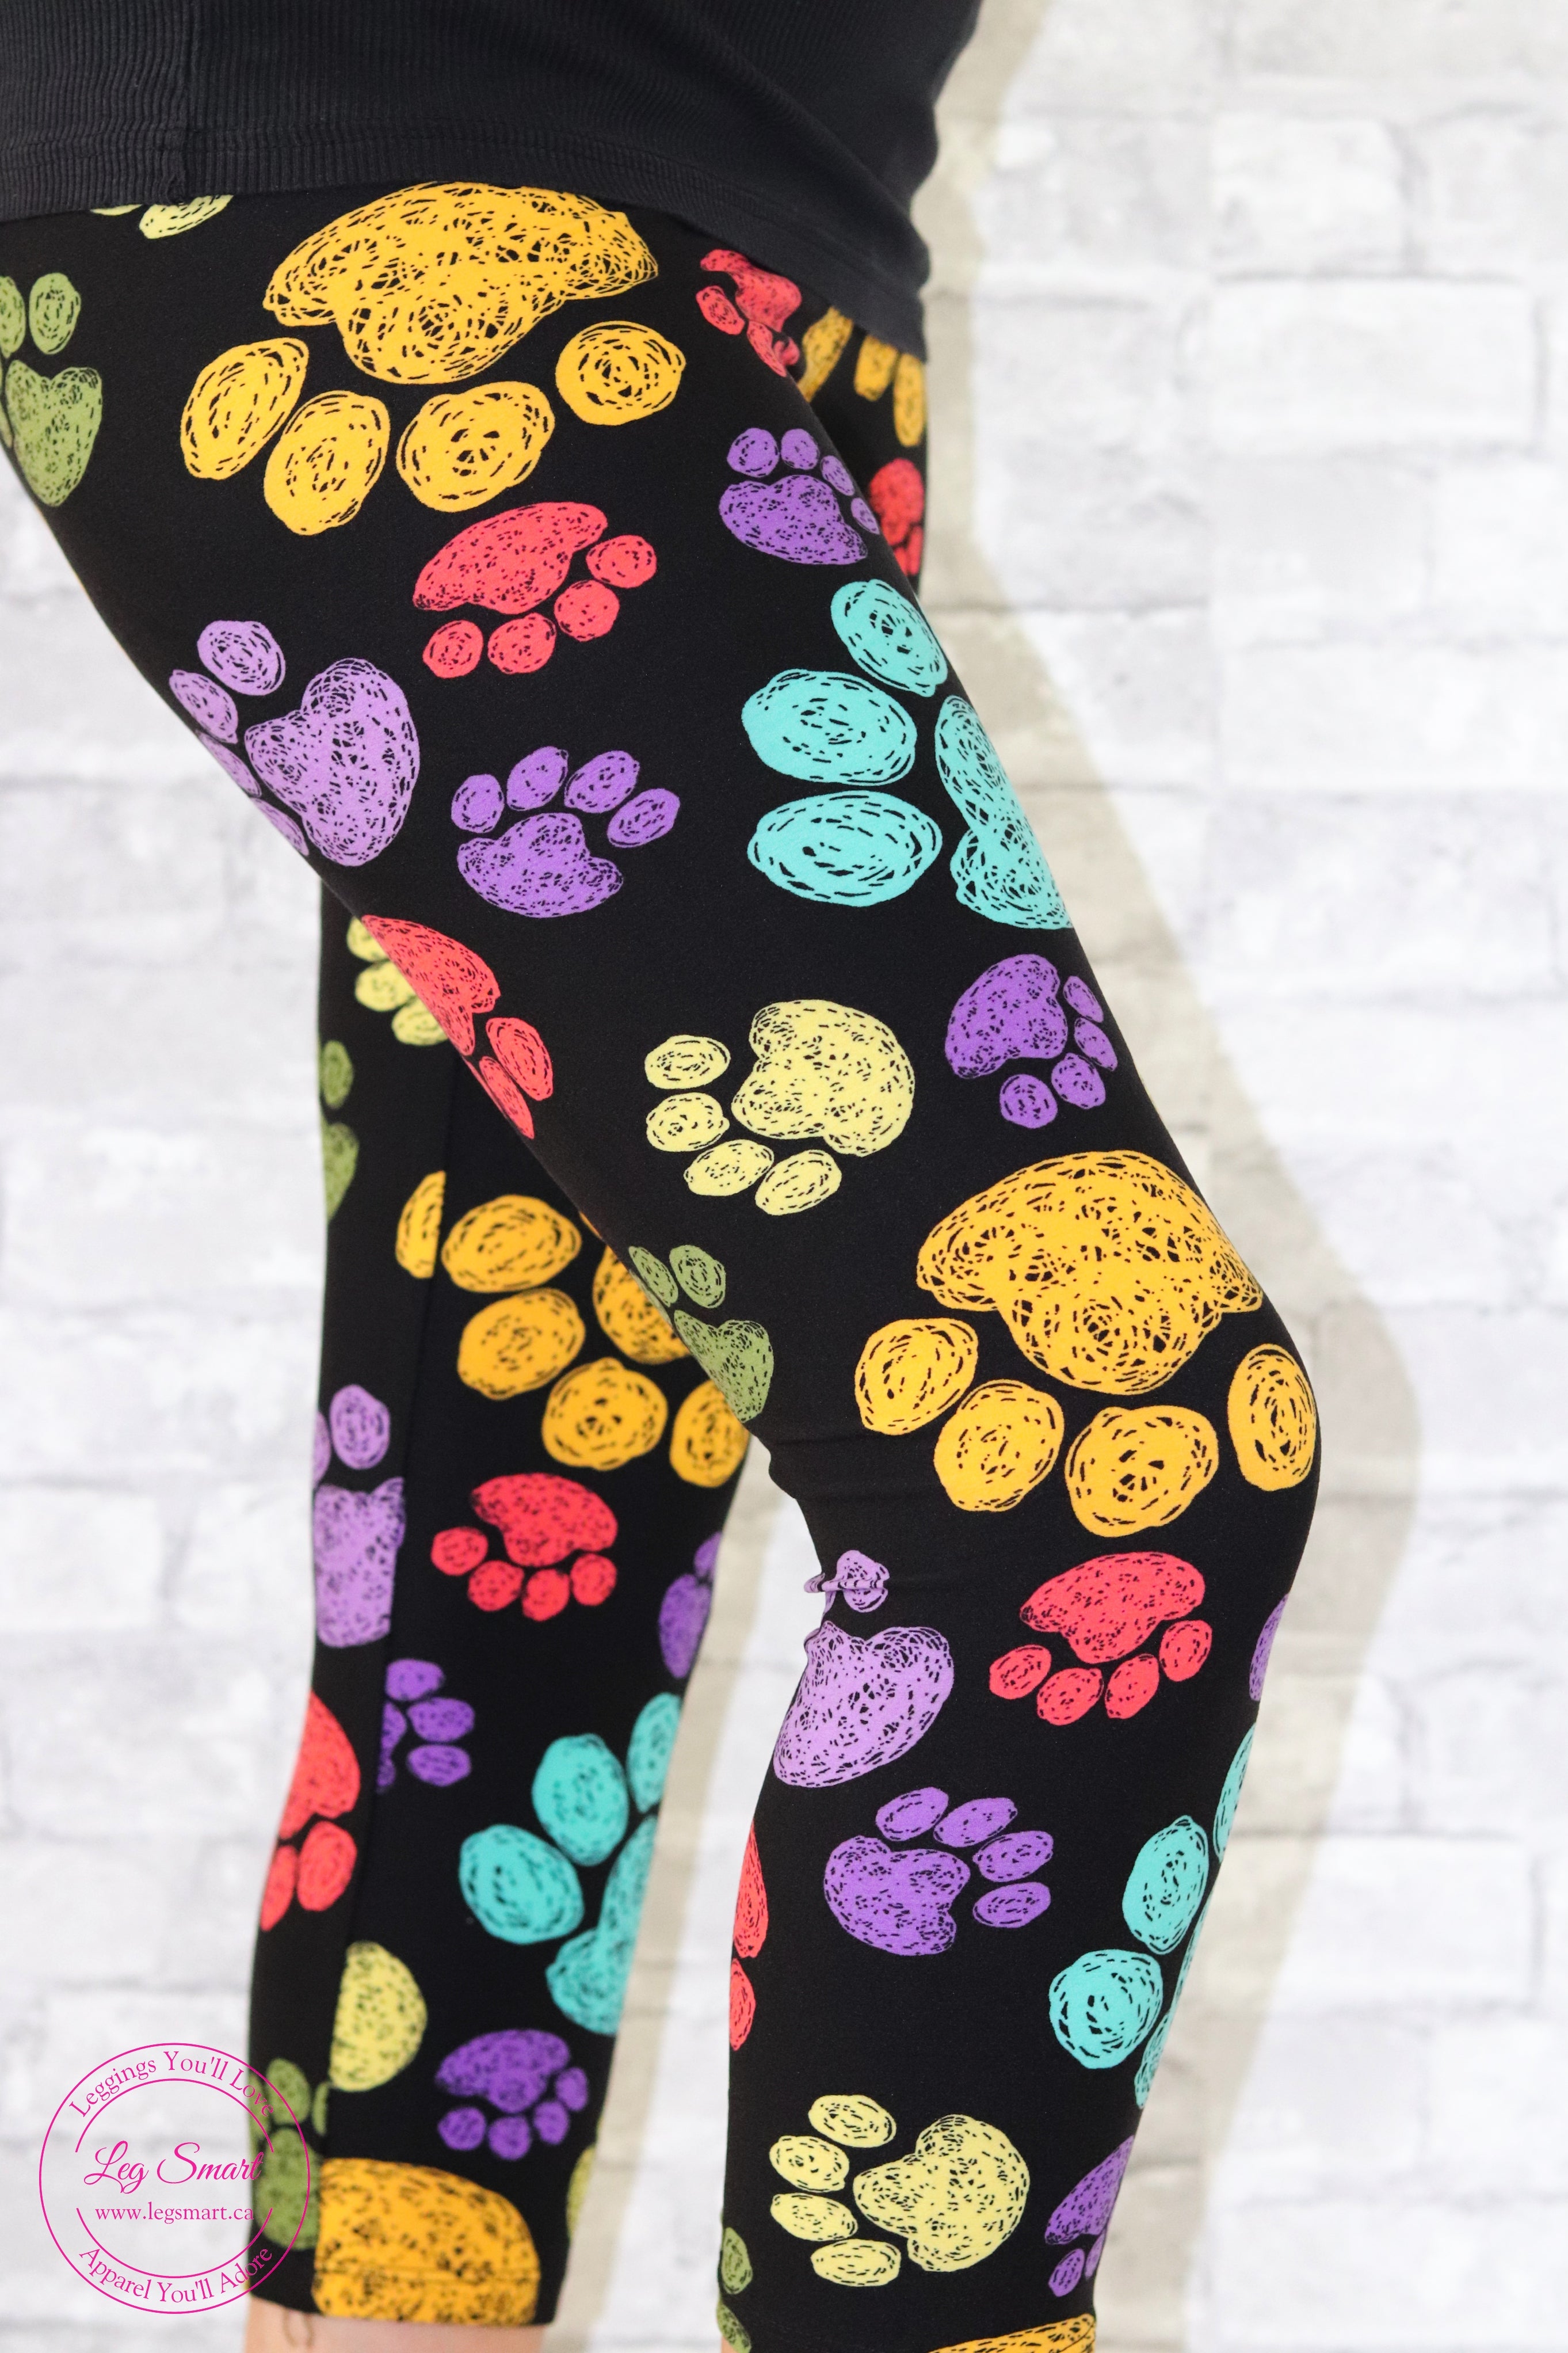 Buy online Quirky Print Multicoloured Leggings from Capris